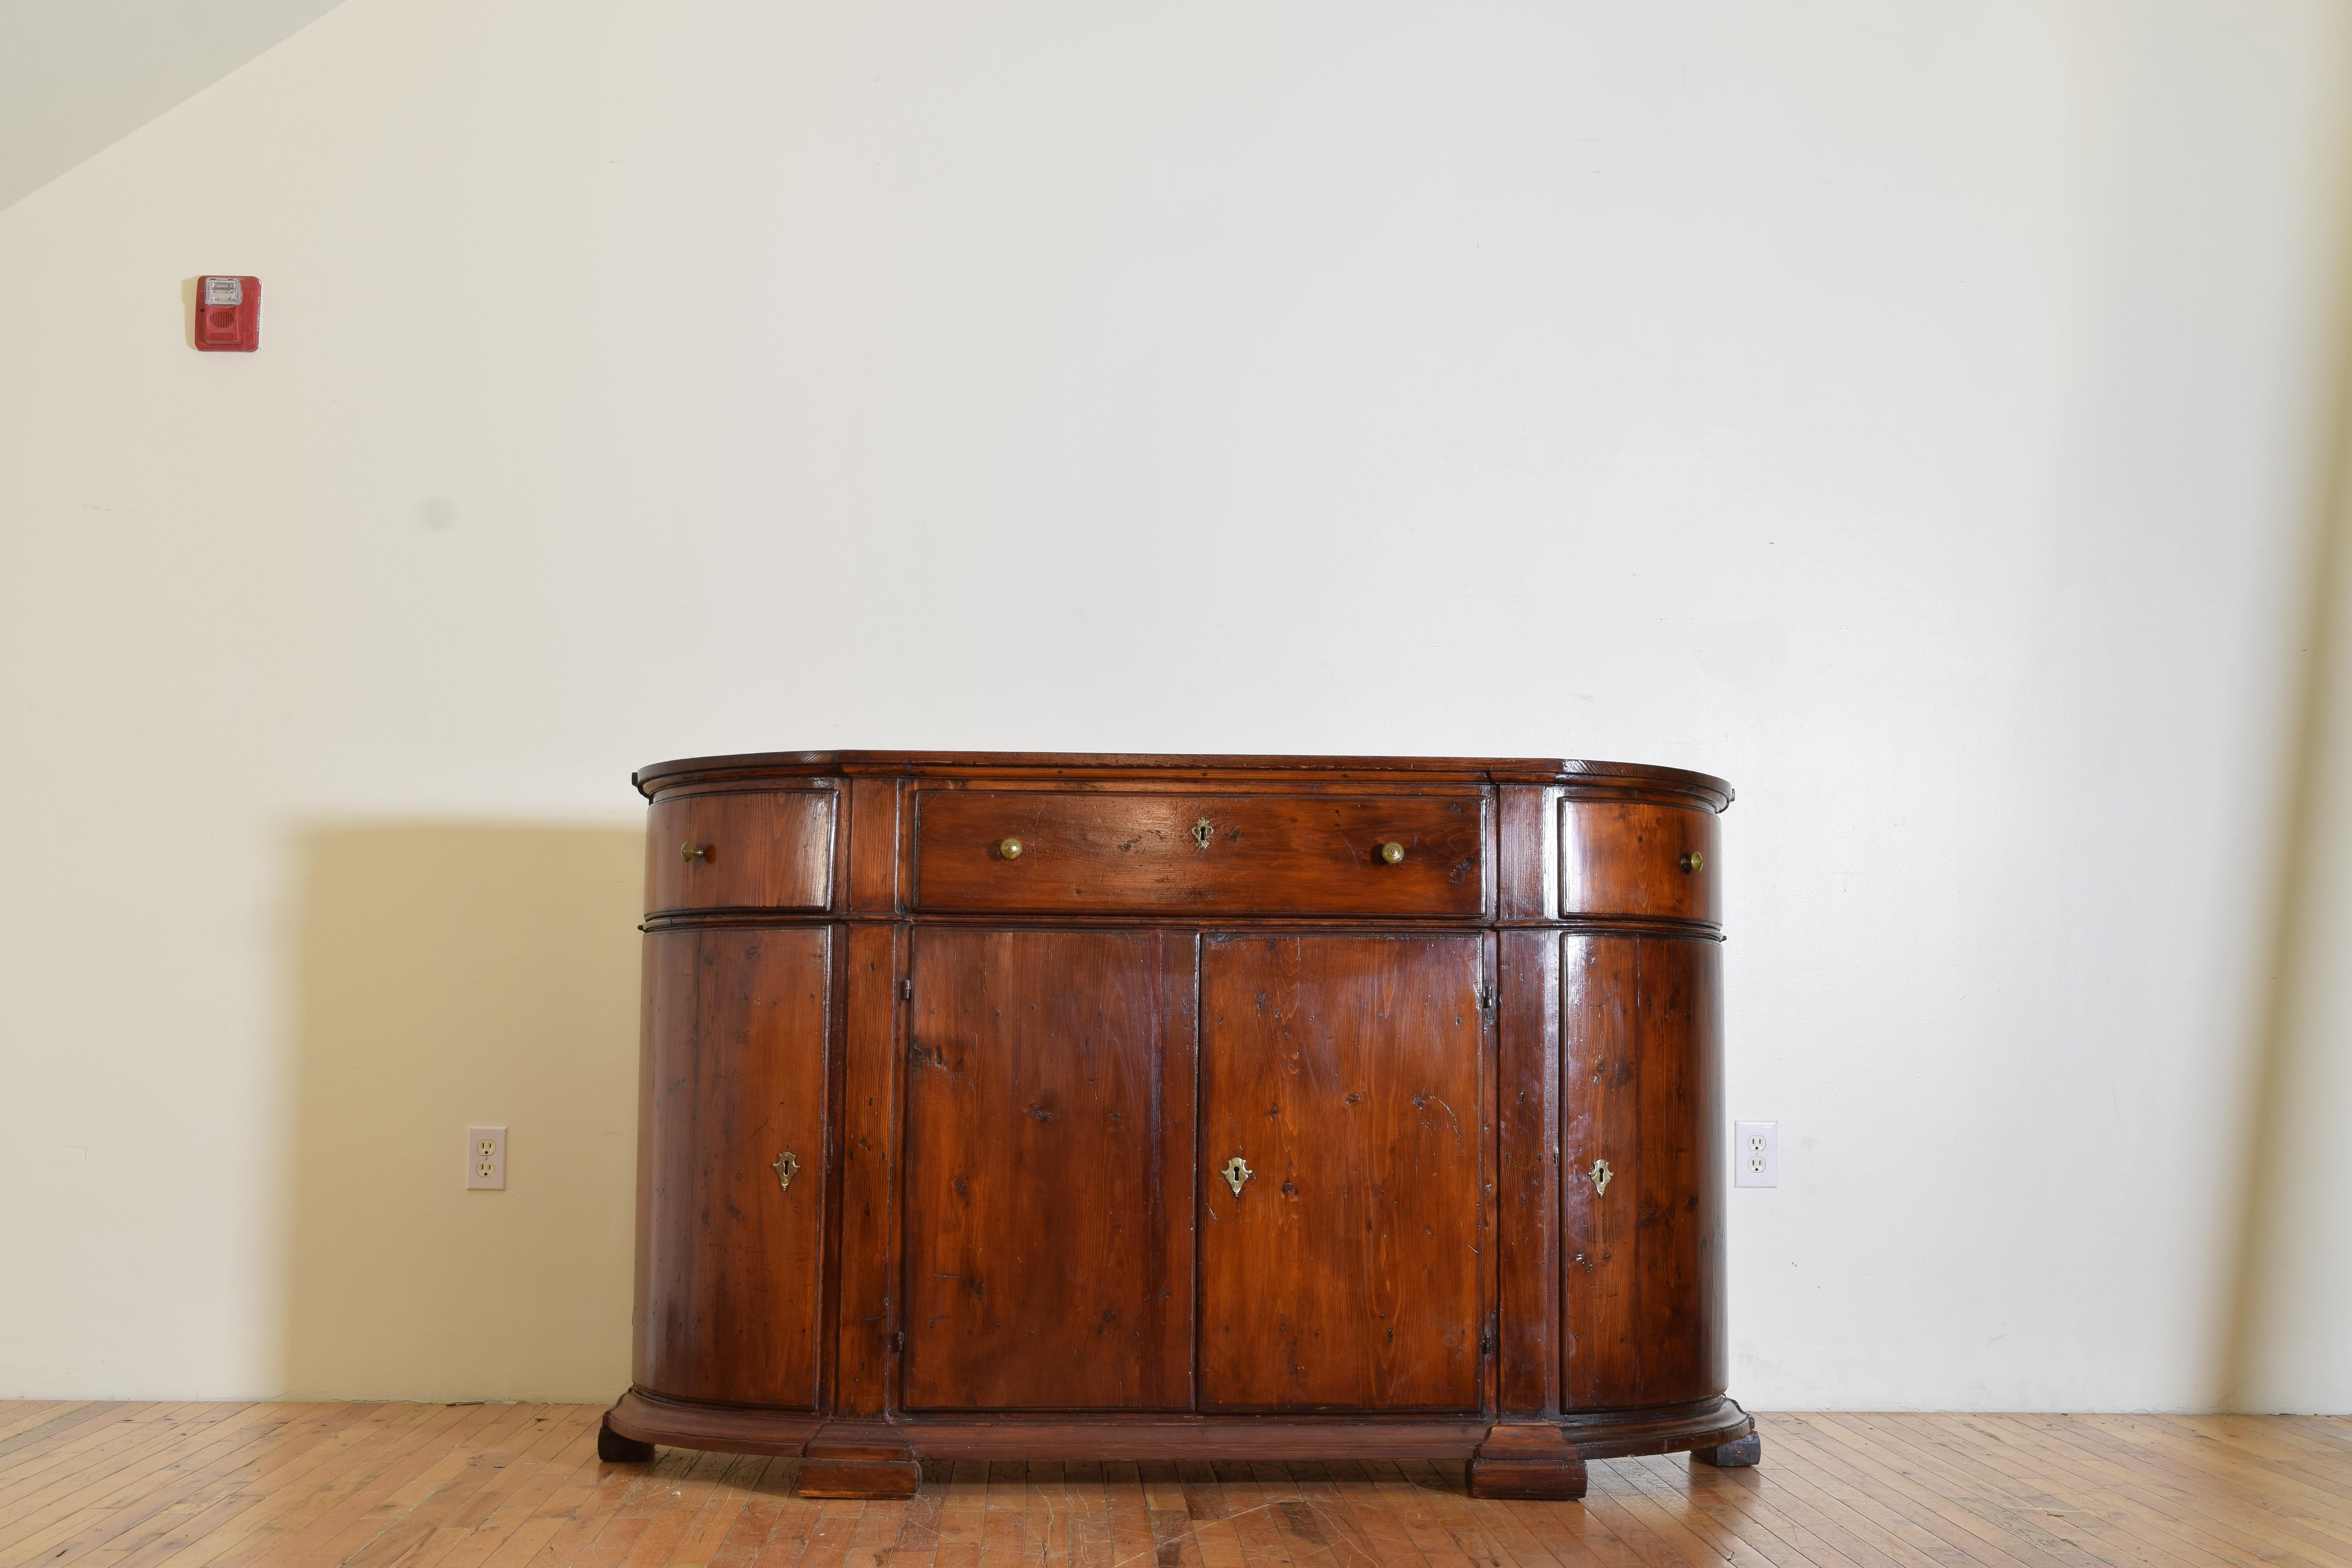 Coming from the mountains in the Northern part of the Veneto region of Italy this credenza features a rectangular top with convex curving sides, with one large centered drawer flanked by two smaller curved, drawers, the lower part of the case with